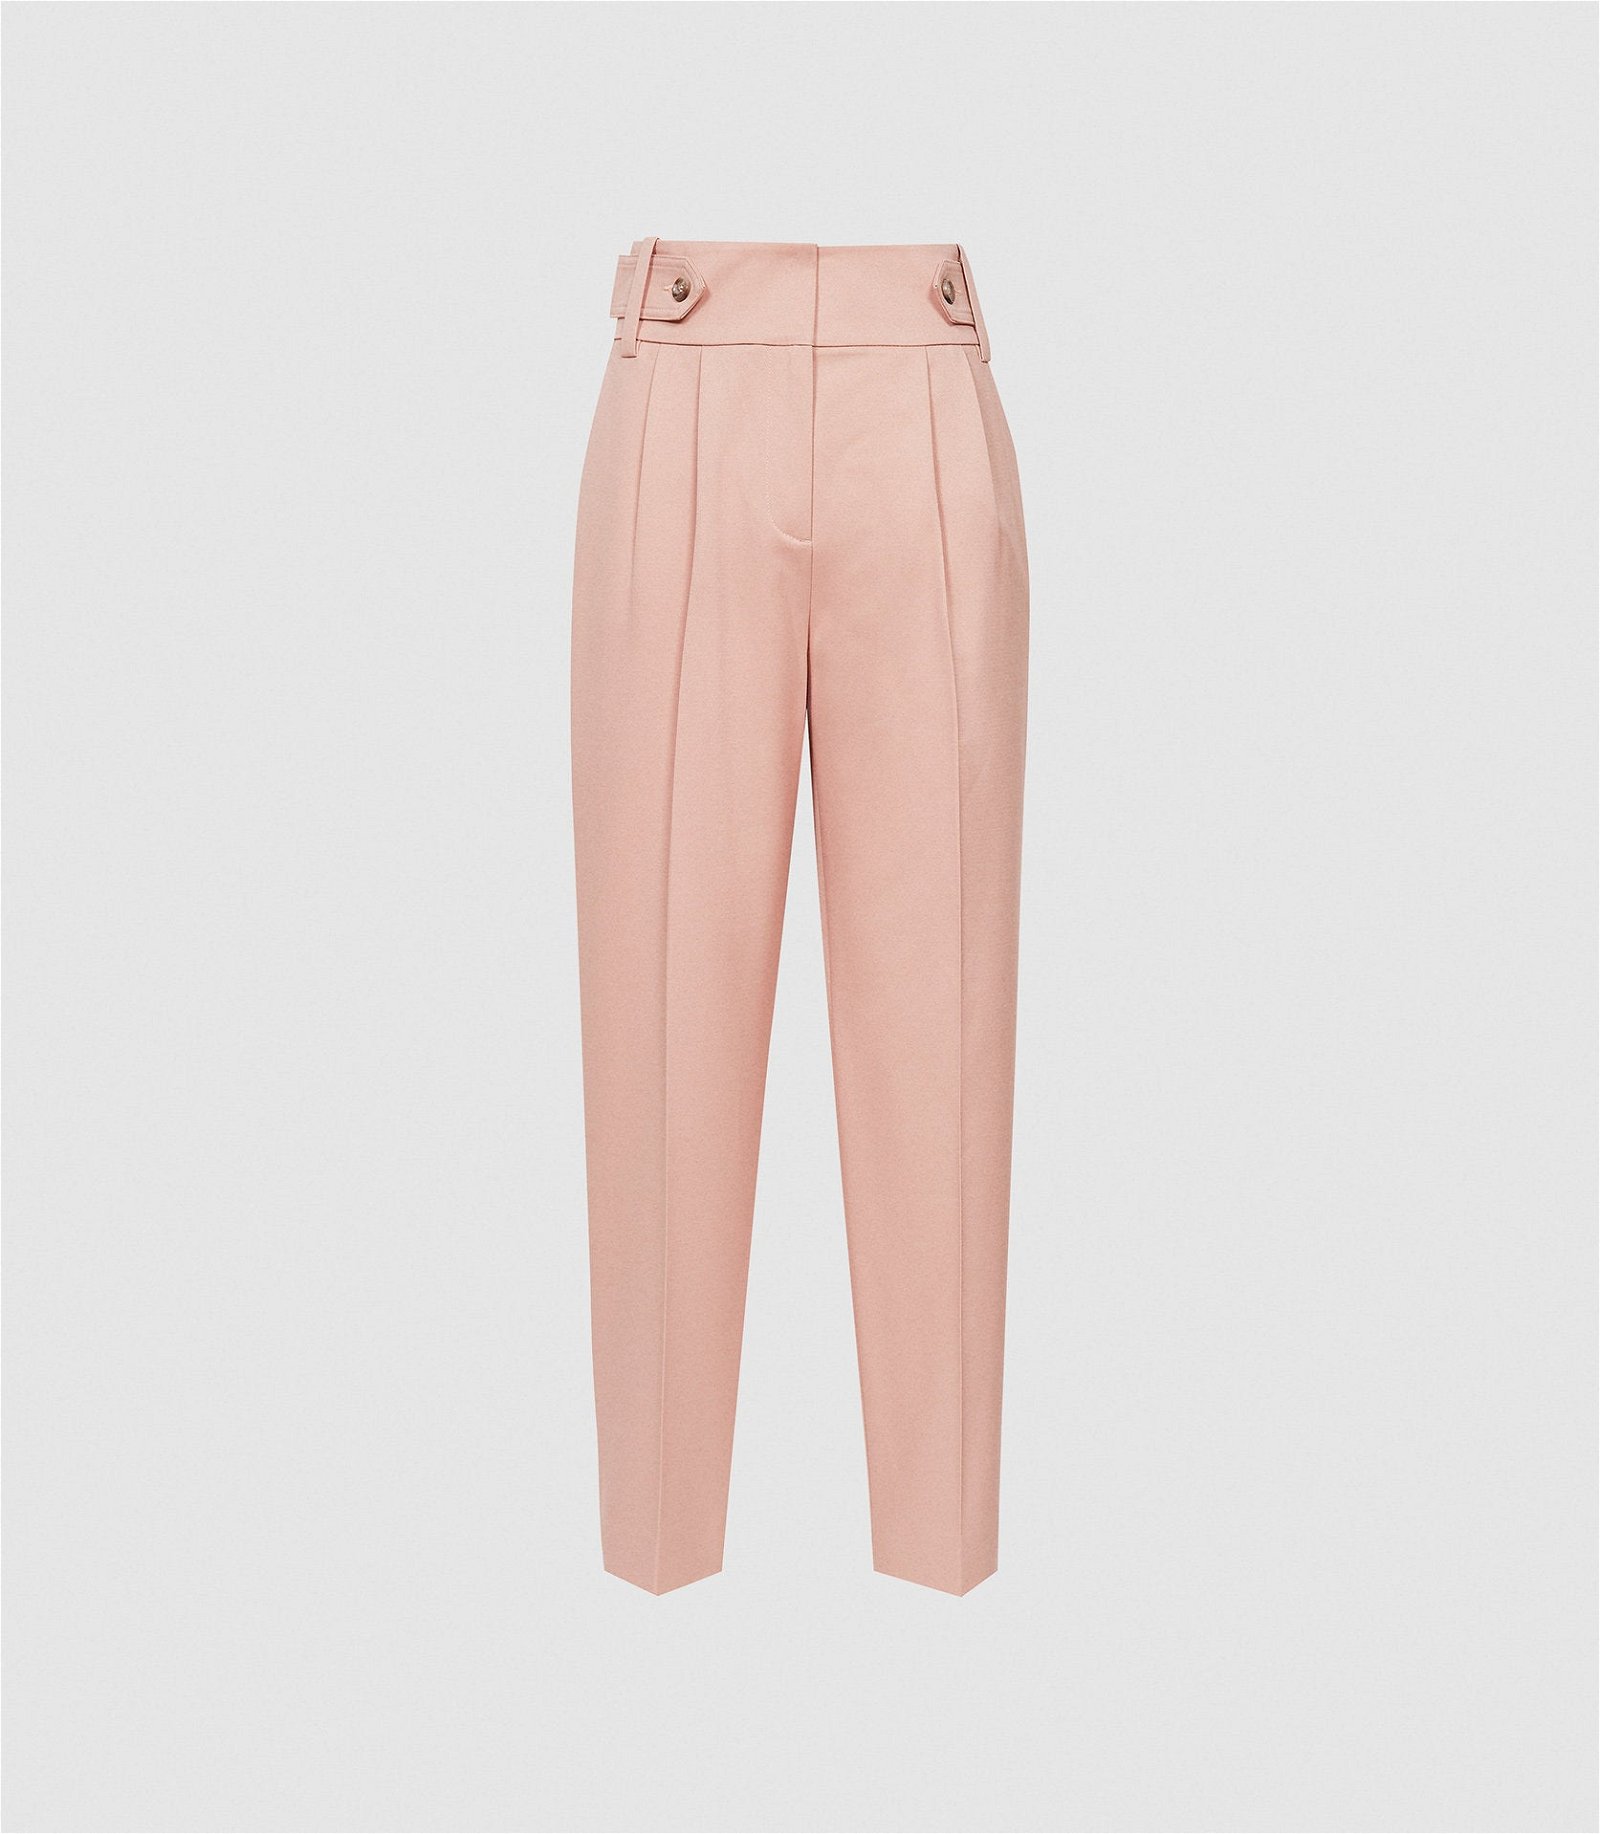 Women's Pink Trousers  Pink Cargo & Tapered Trousers - Reiss UK